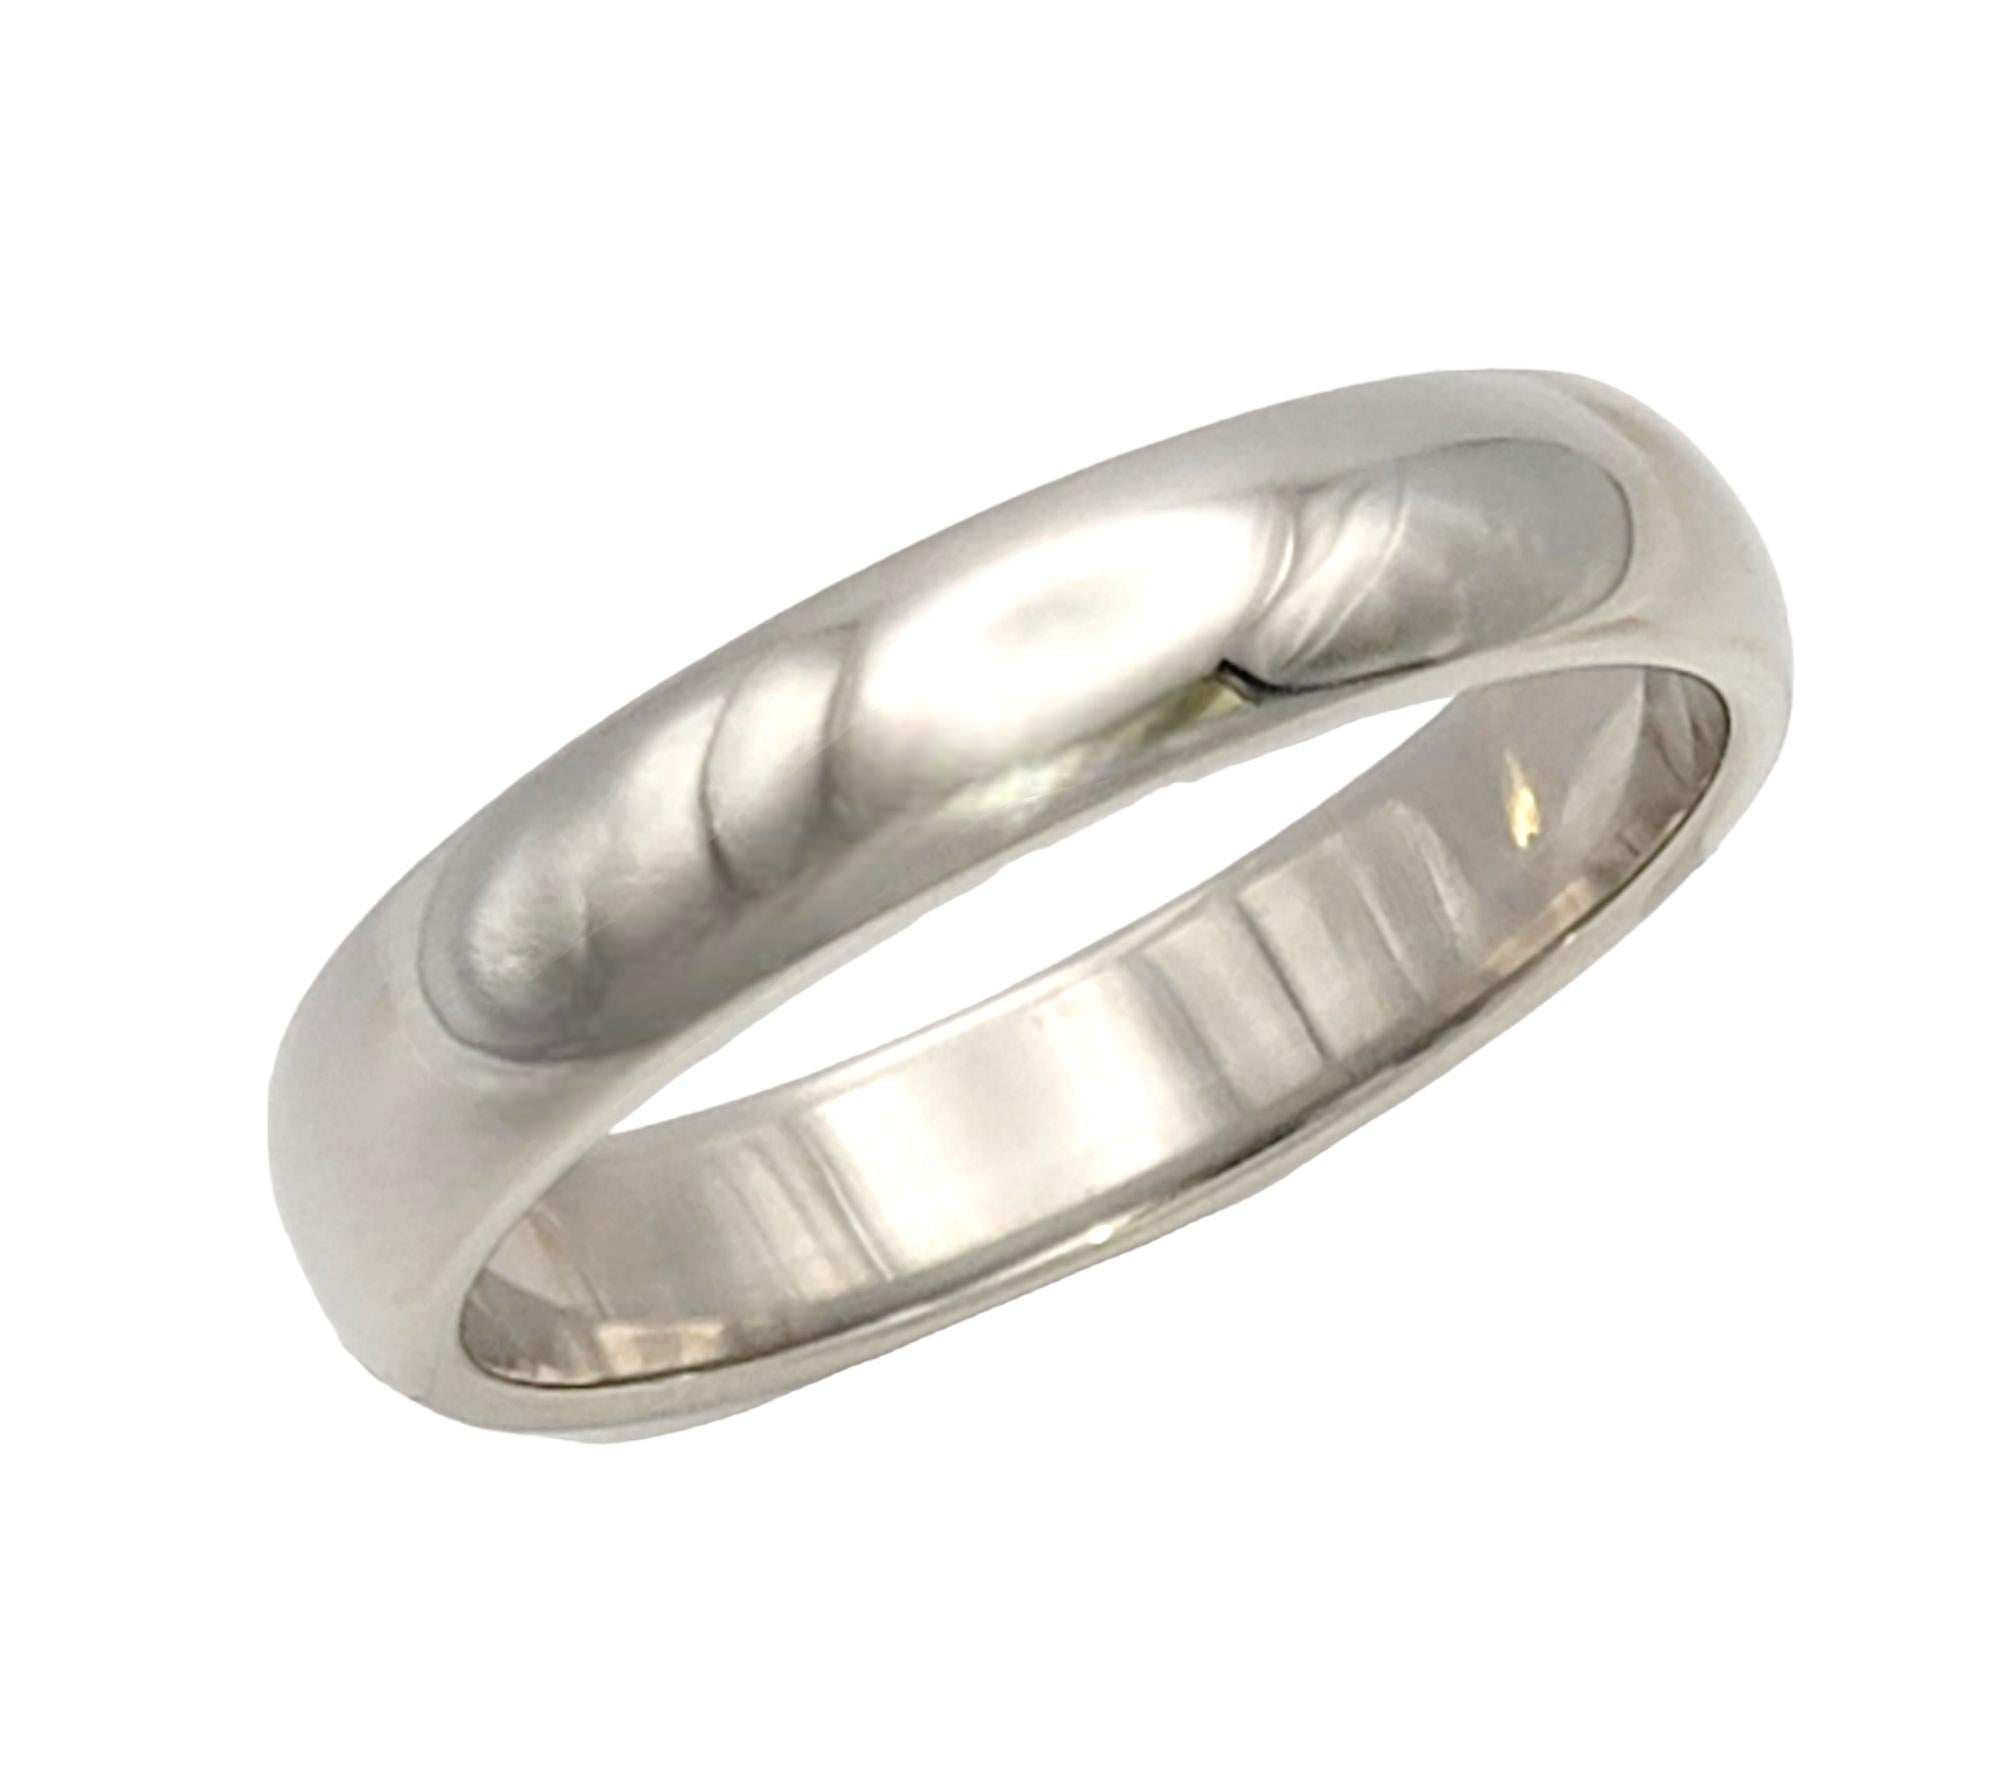 Ring size: 9.5

The classic Tiffany & Co. 'Forever' band ring is the quintessential wedding ring. Founded in 1837 in New York City, Tiffany & Co. is one of the world's most storied luxury design houses recognized globally for its innovative jewelry